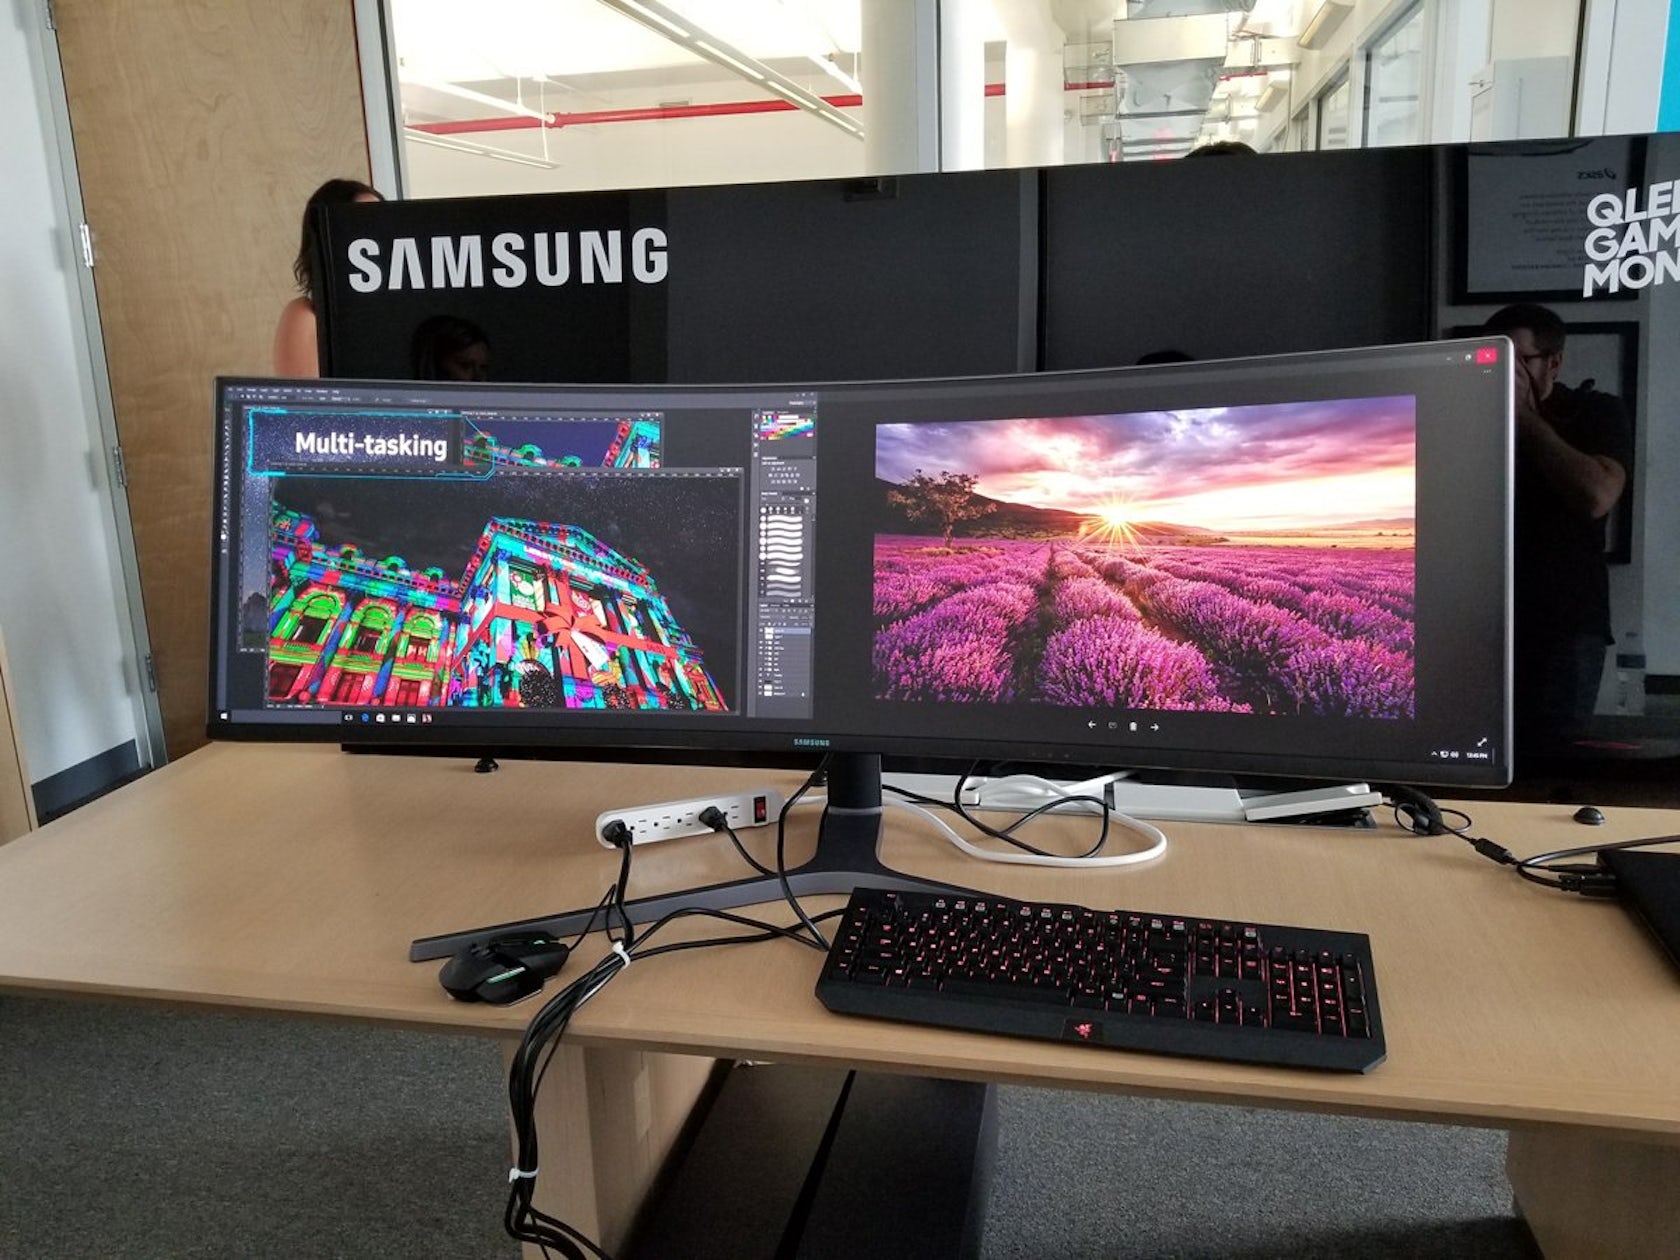 The World's Widest Computer Monitor: Expensive Gimmick or Architect's  Dream? - Architizer Journal